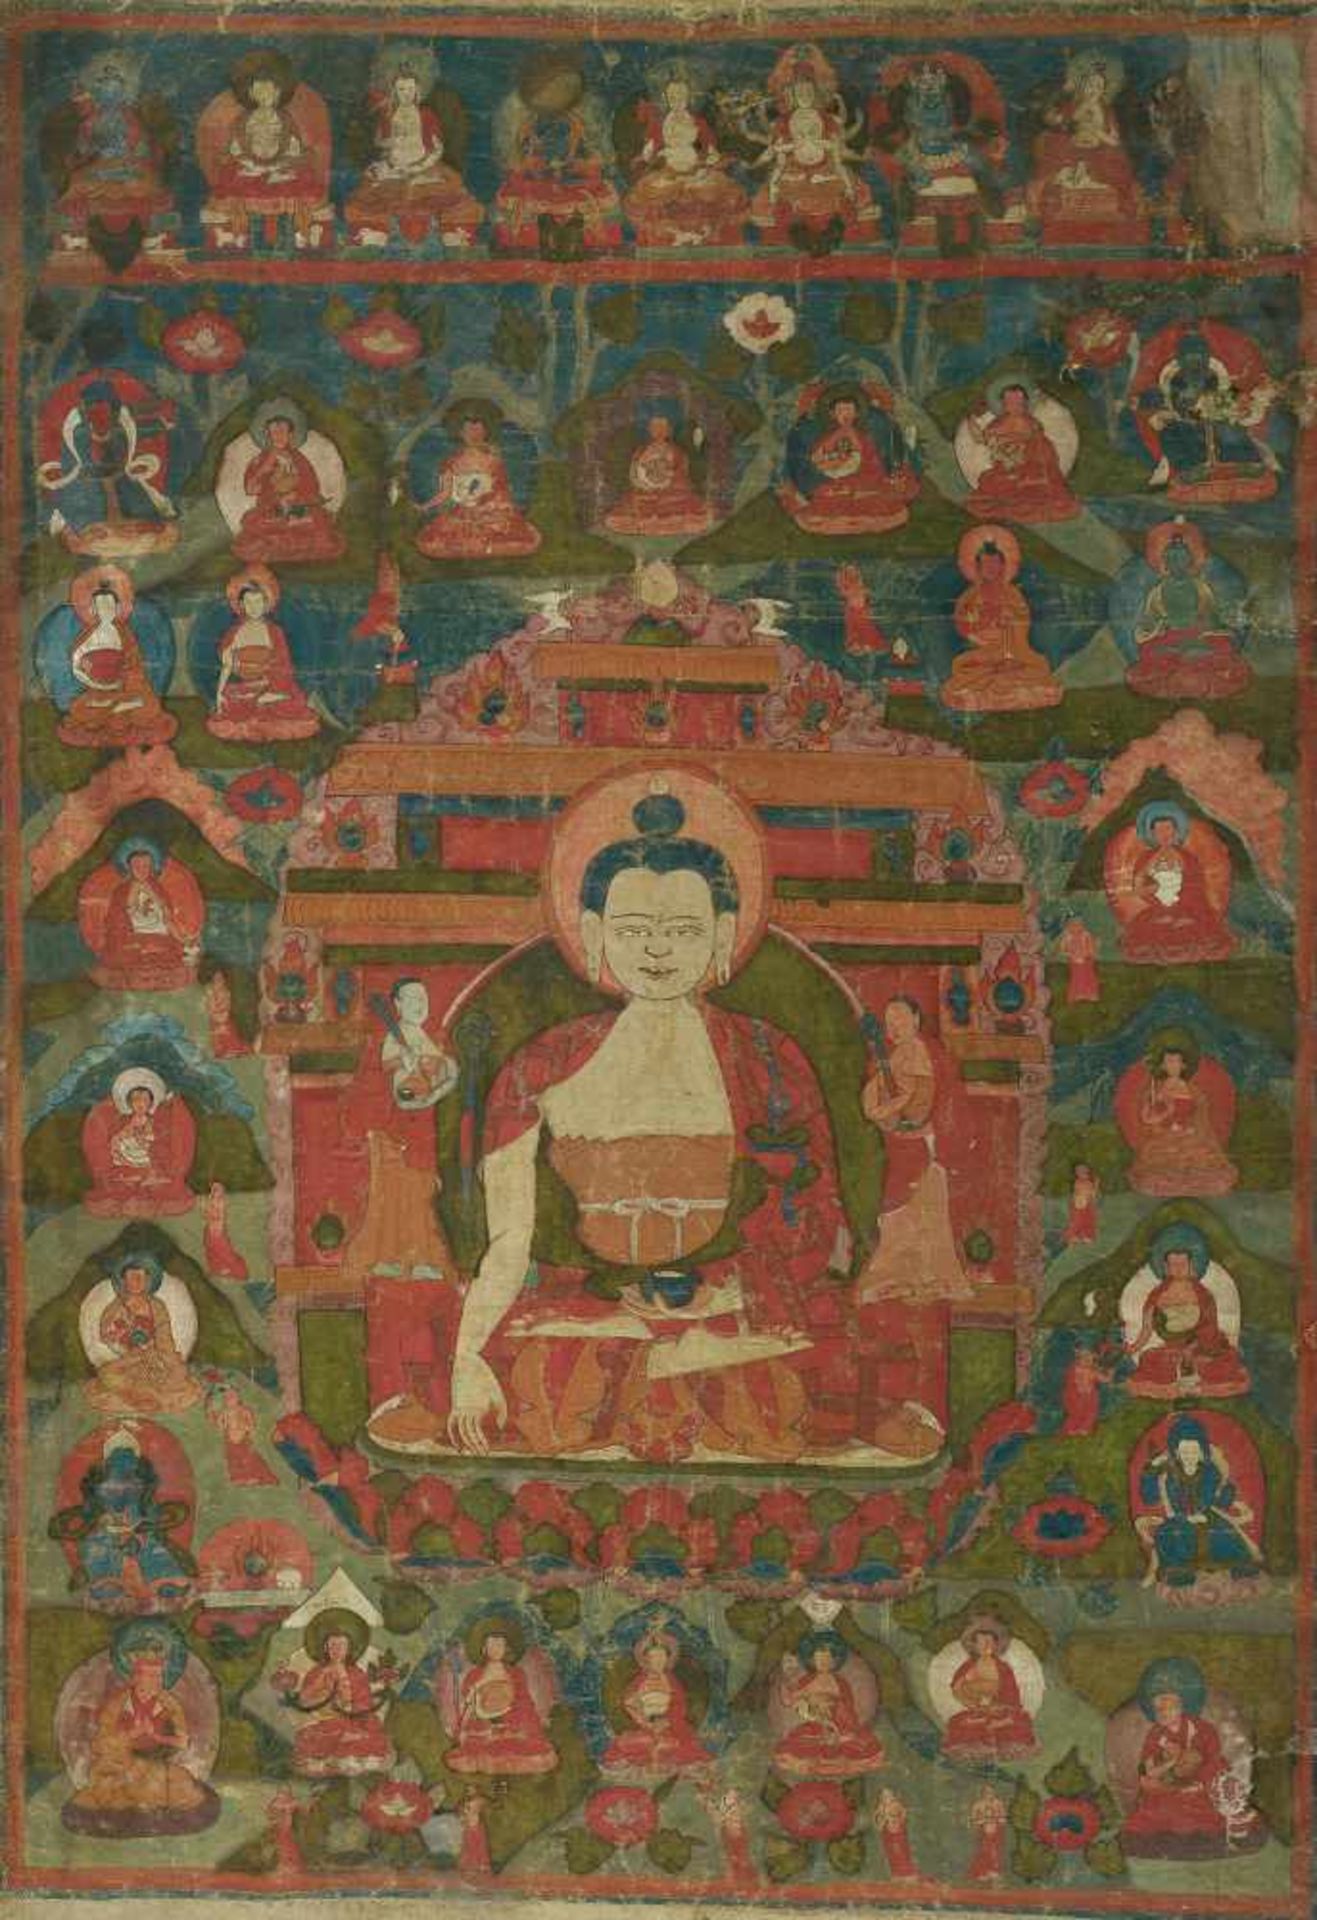 RARE BONPO THANGKA WITH TRITSUG GYALWA. Tibet. 18th c. Pigments on fabric. The picture shows the